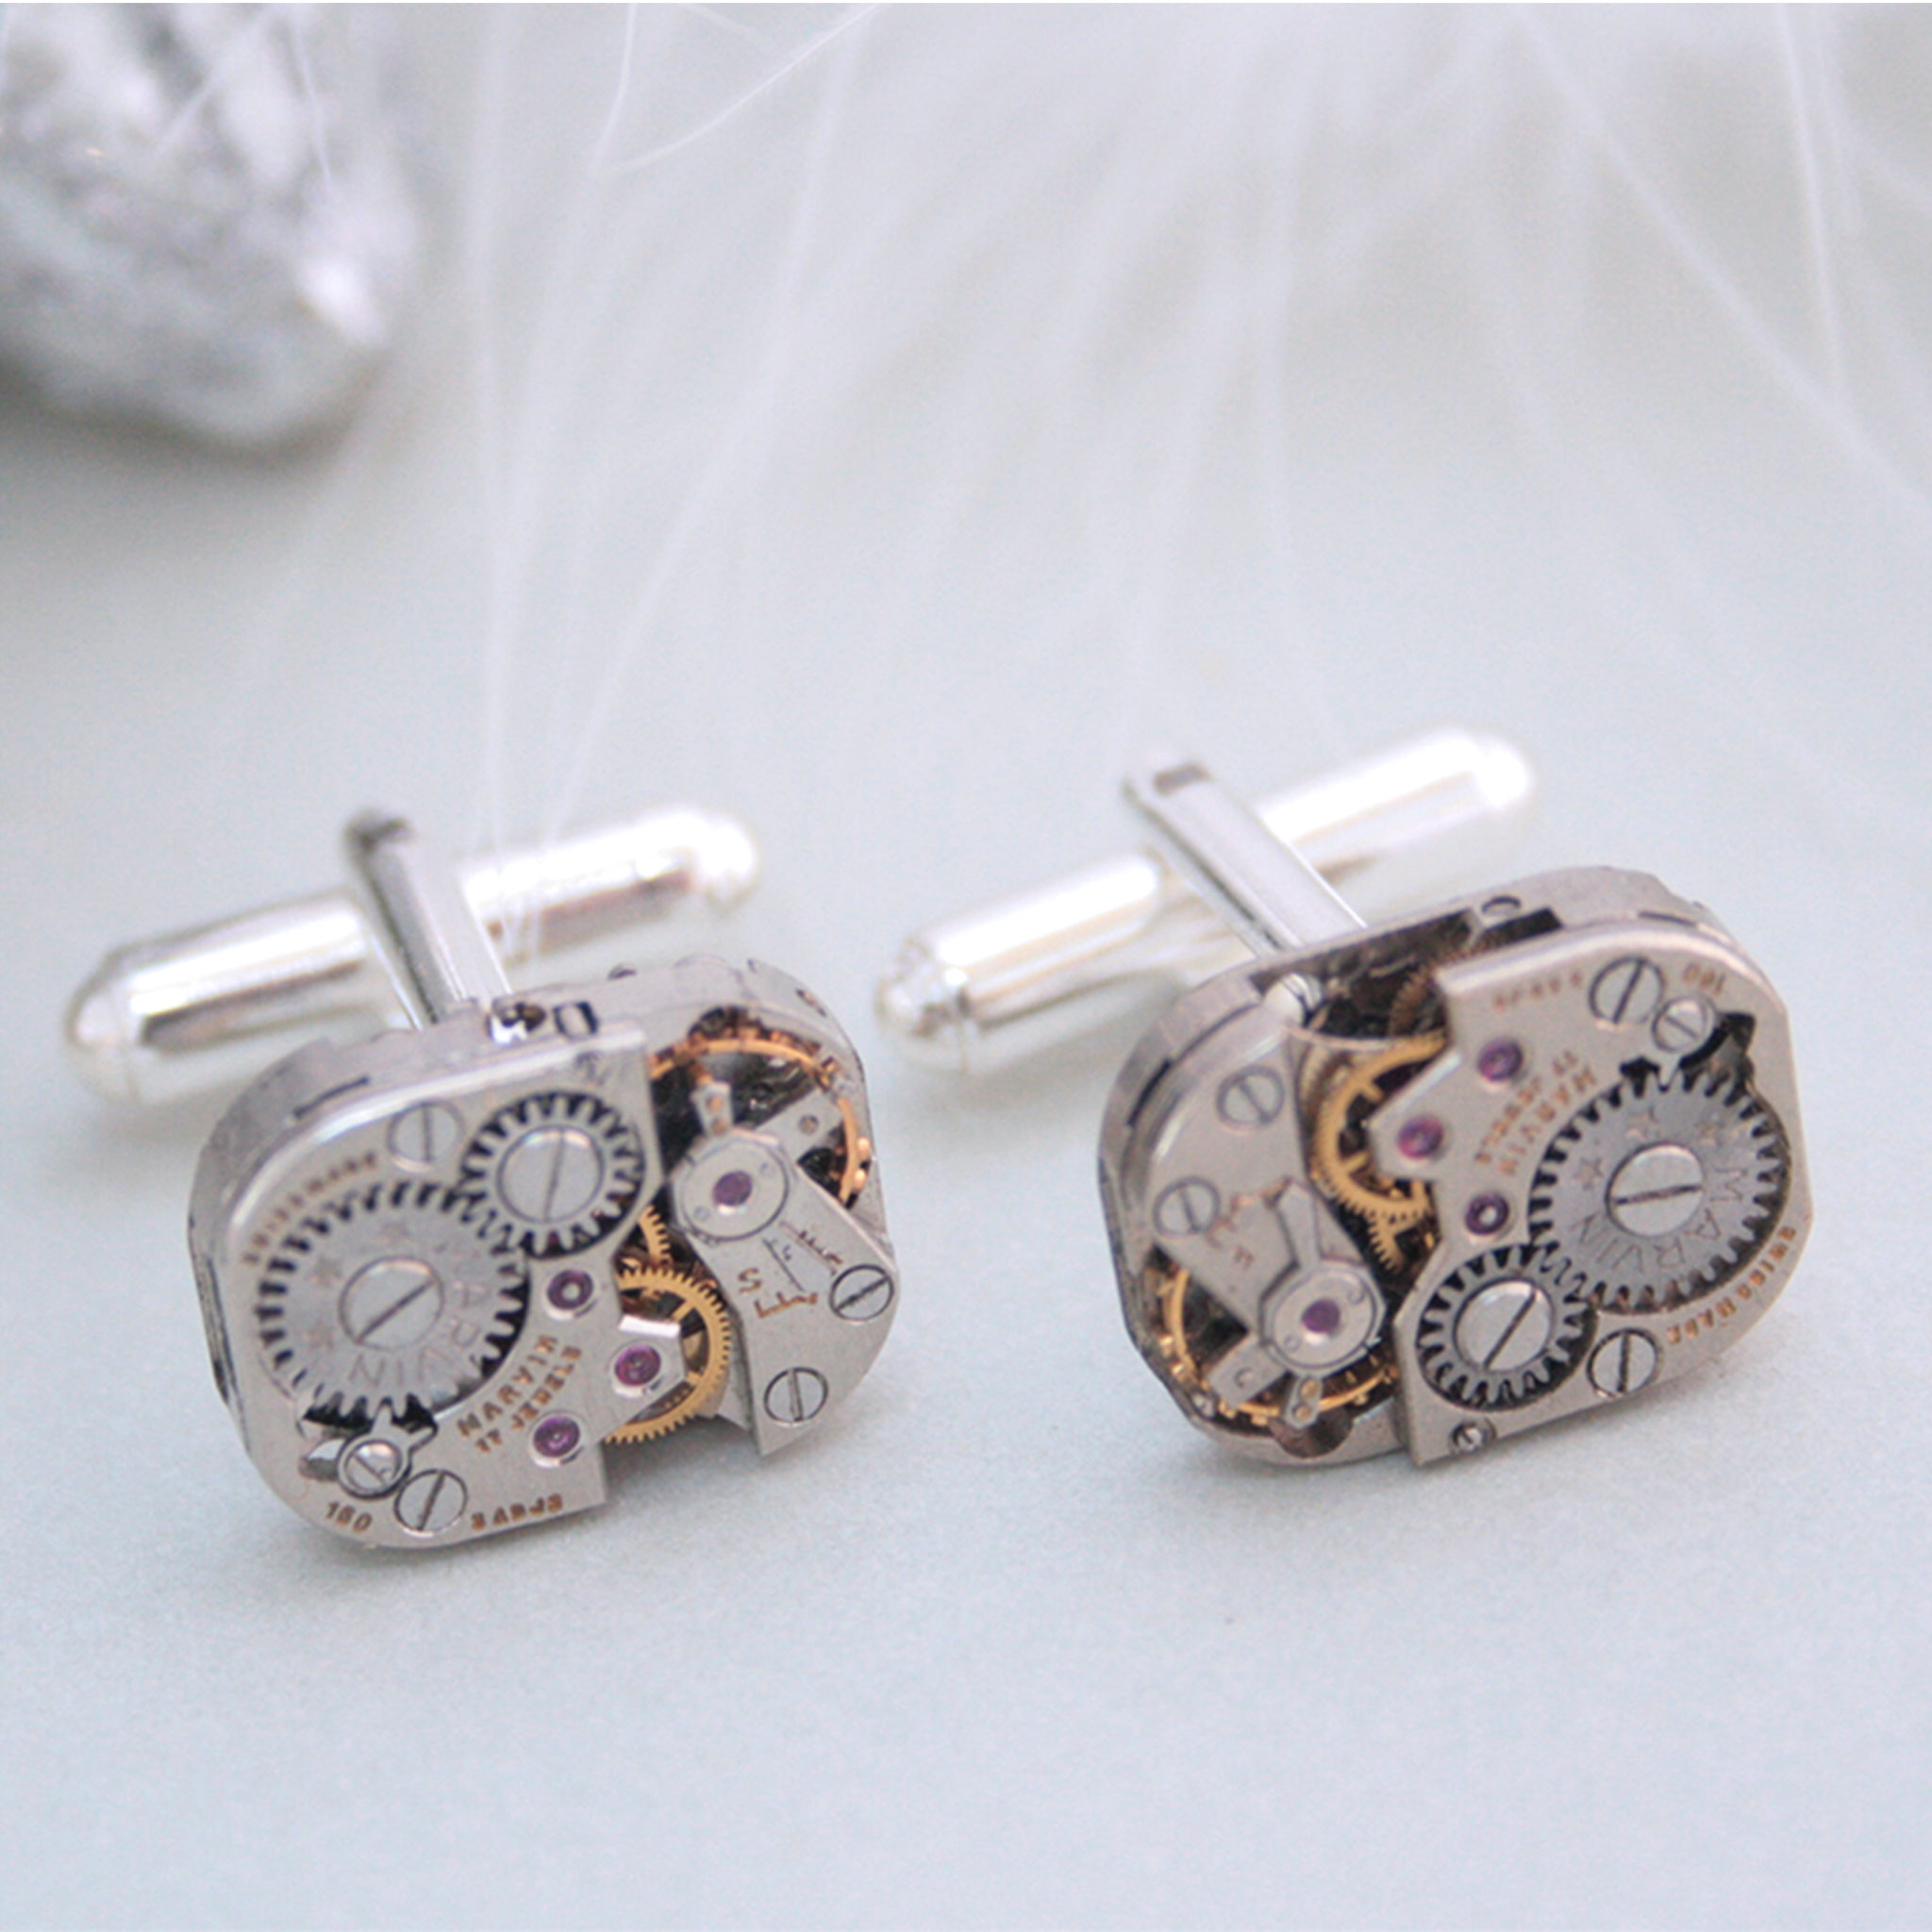 Cool Cufflinks for Watch Lovers